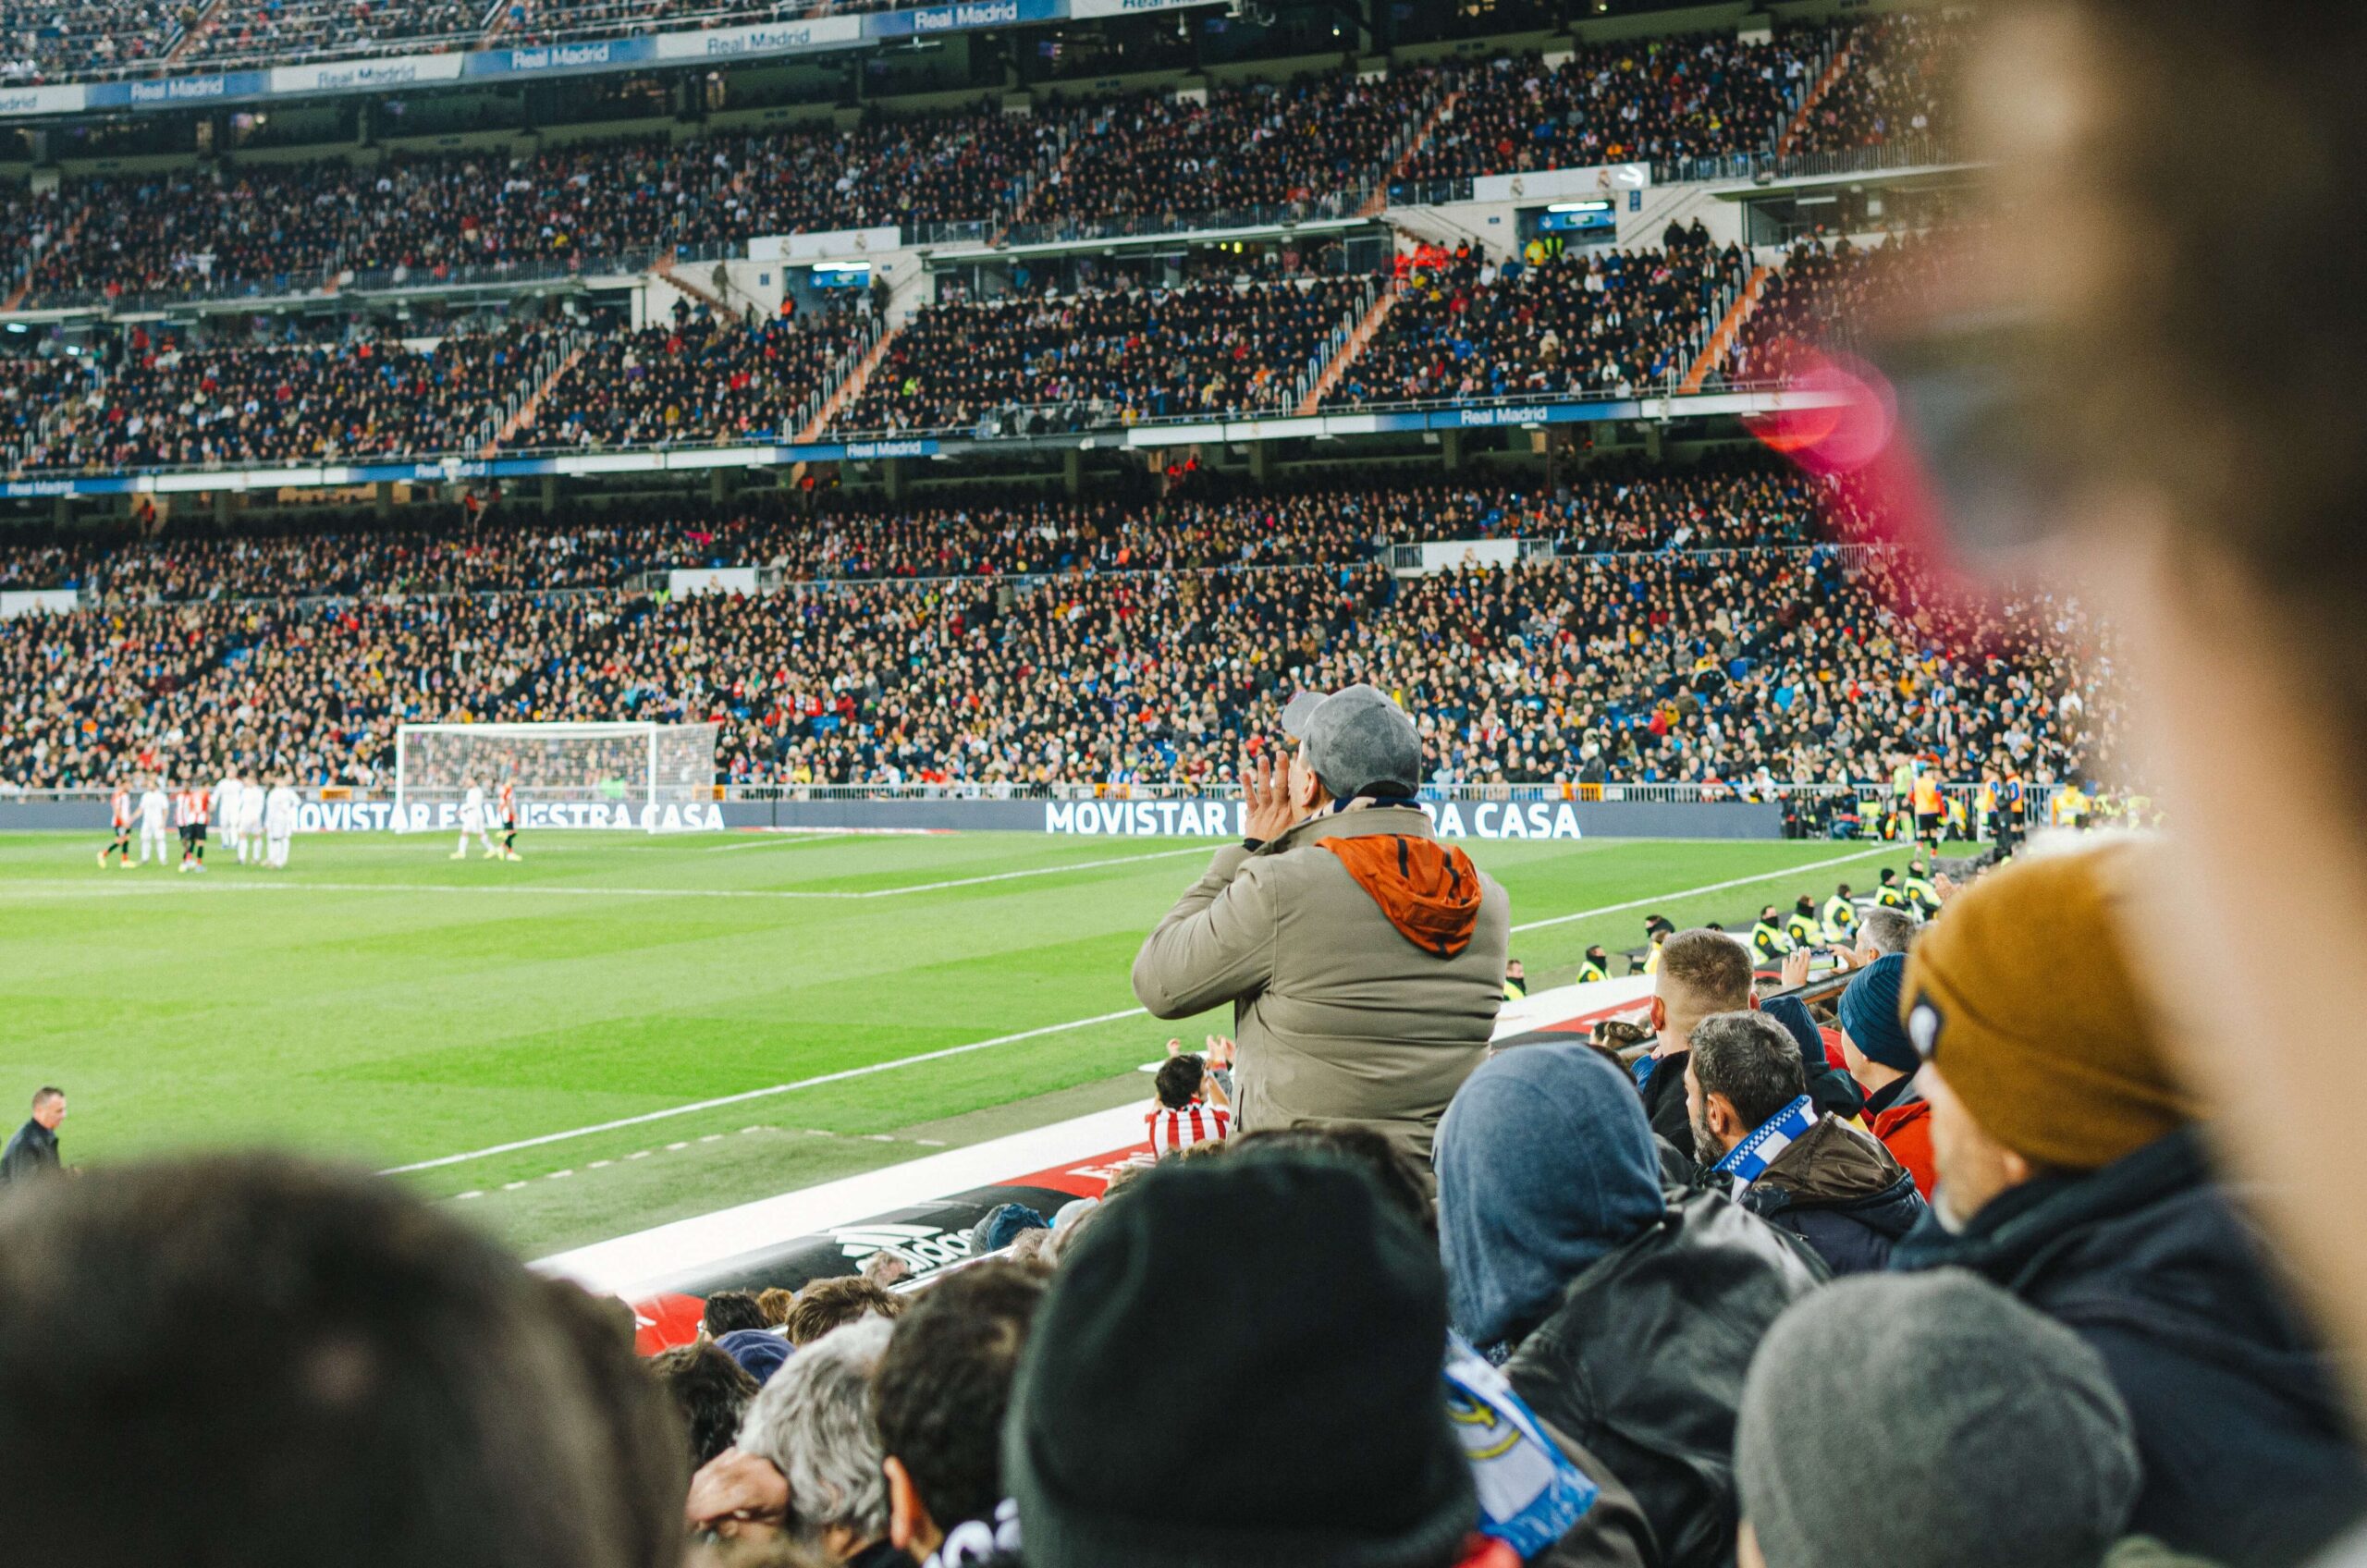 Things to do in Spain - Watch a Game on Santiago Bernabéu